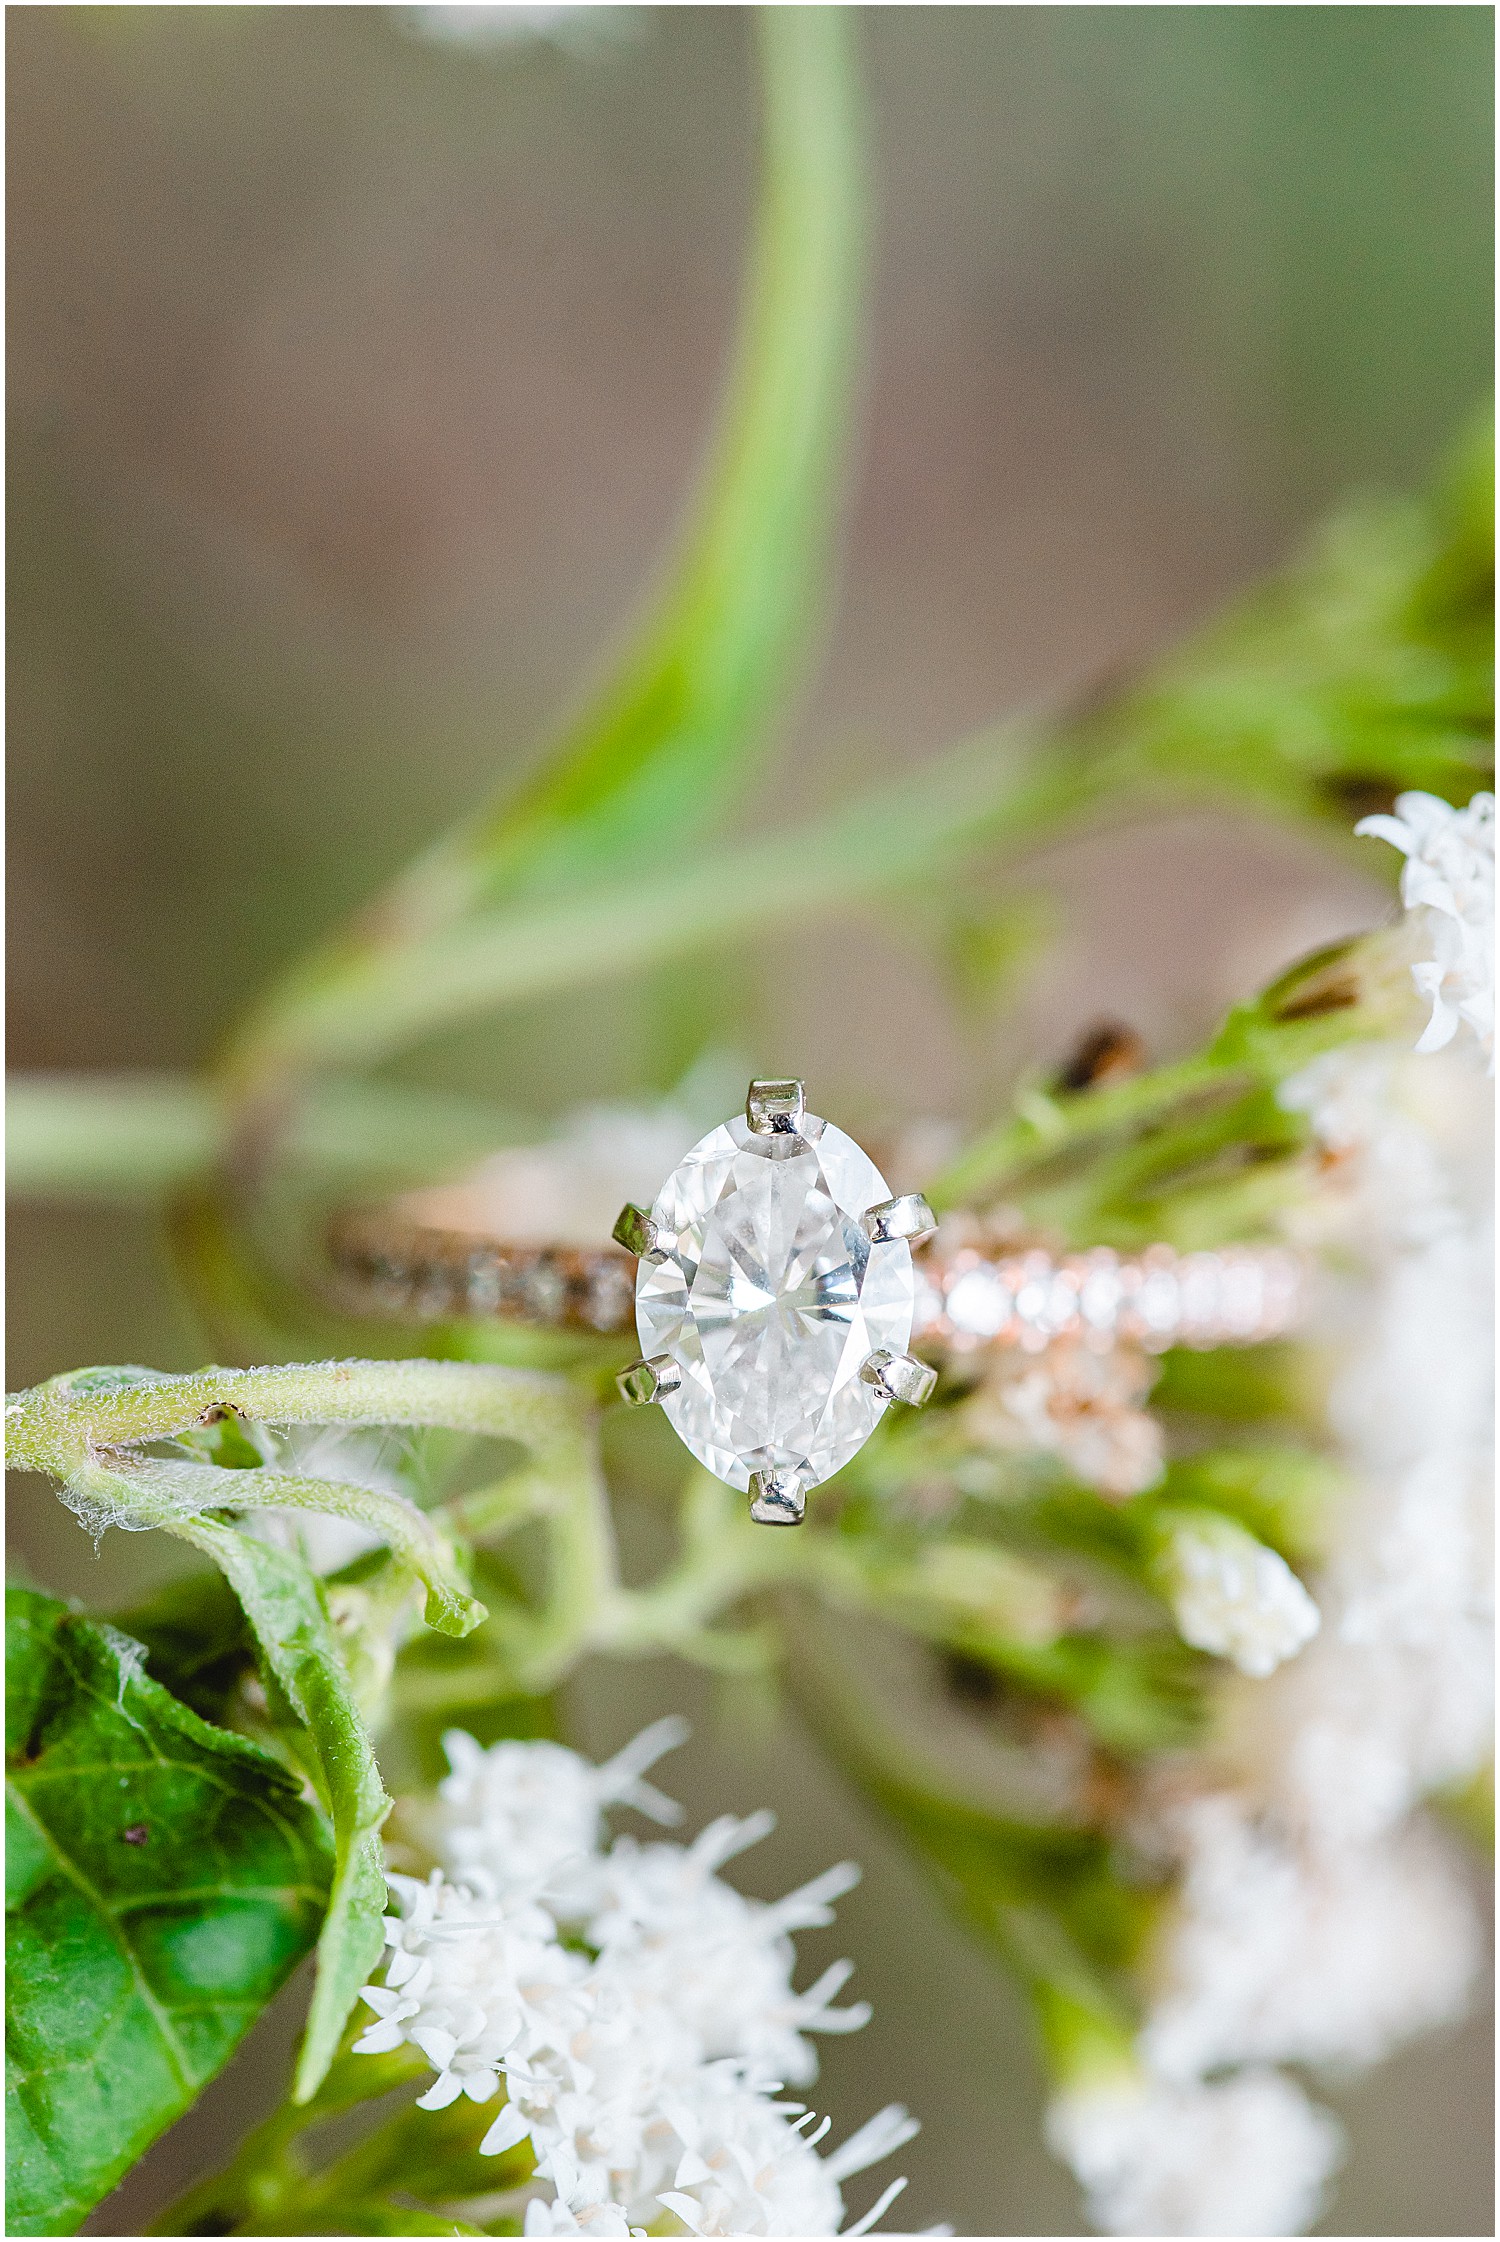 Oval cut engagement ring detail shot on green and white flower.